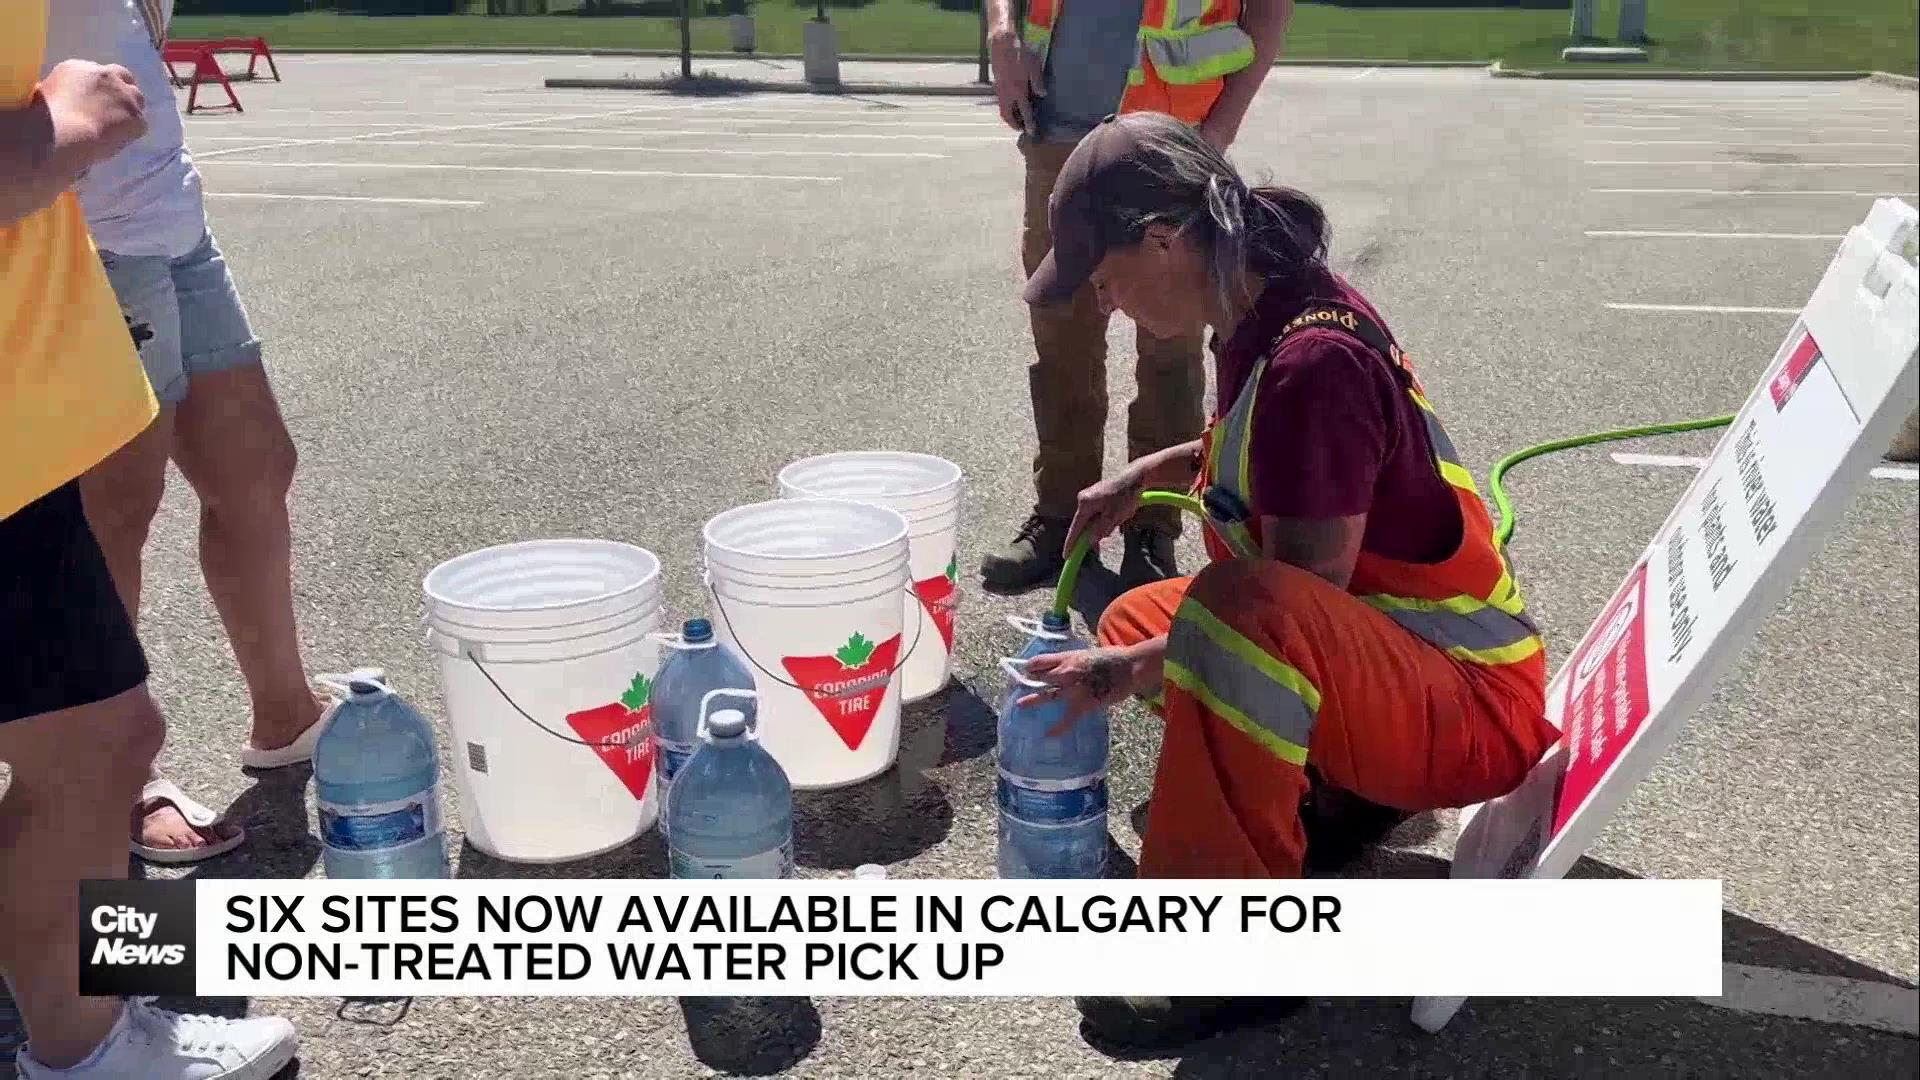 Six sites available in Calgary for non-treated water pick up